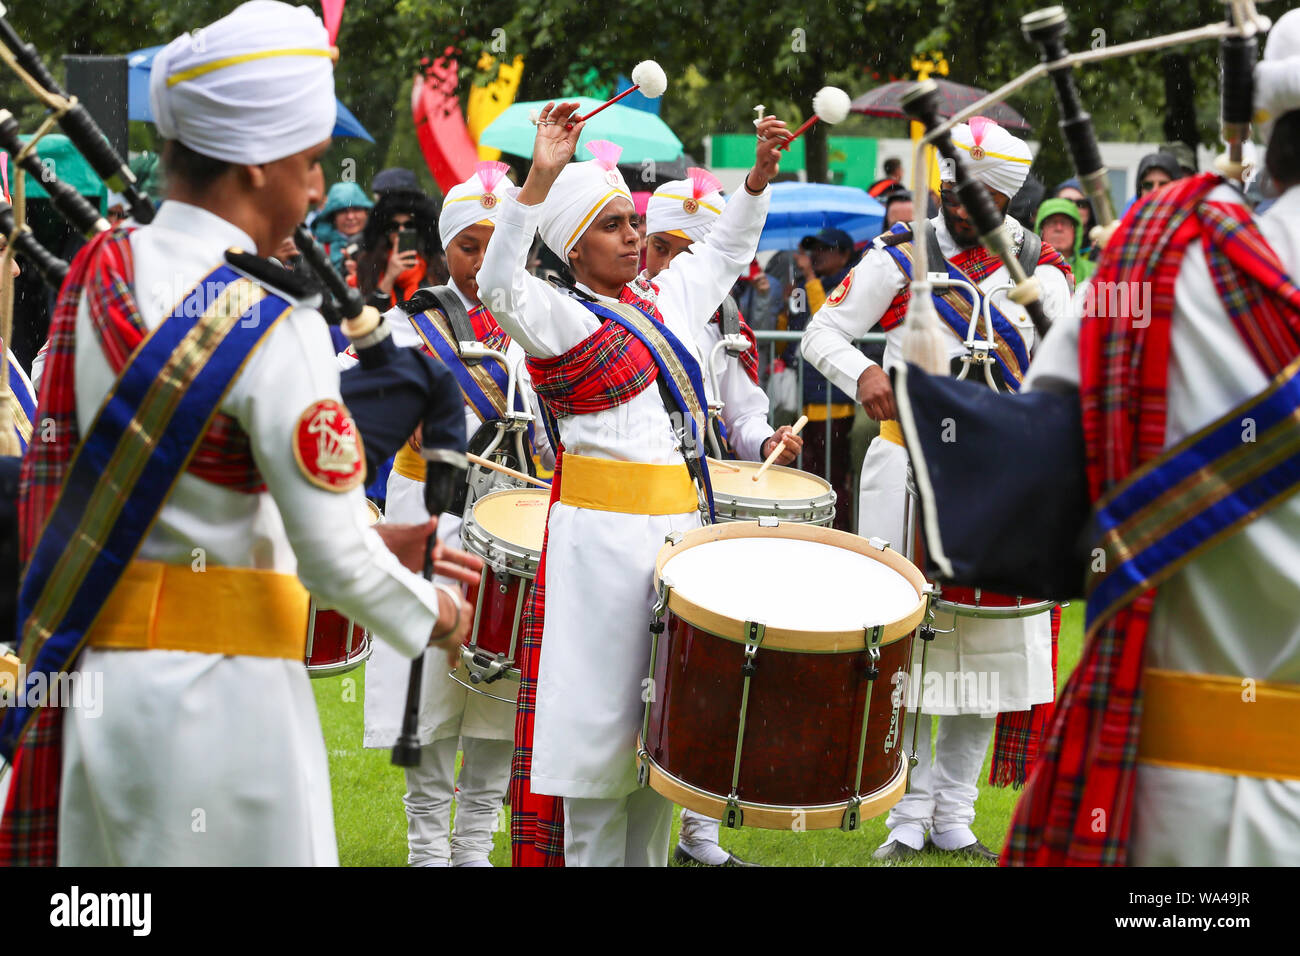 Glasgow, UK. 17th Aug 2019. The very popular and colourful Sri Dasmesh Pipe band from Malaysia had just completed their performances at the World Pipe band Championships at Glasgow Green, Glasgow, Scotland, UK Credit: Findlay/Alamy Live News Stock Photo